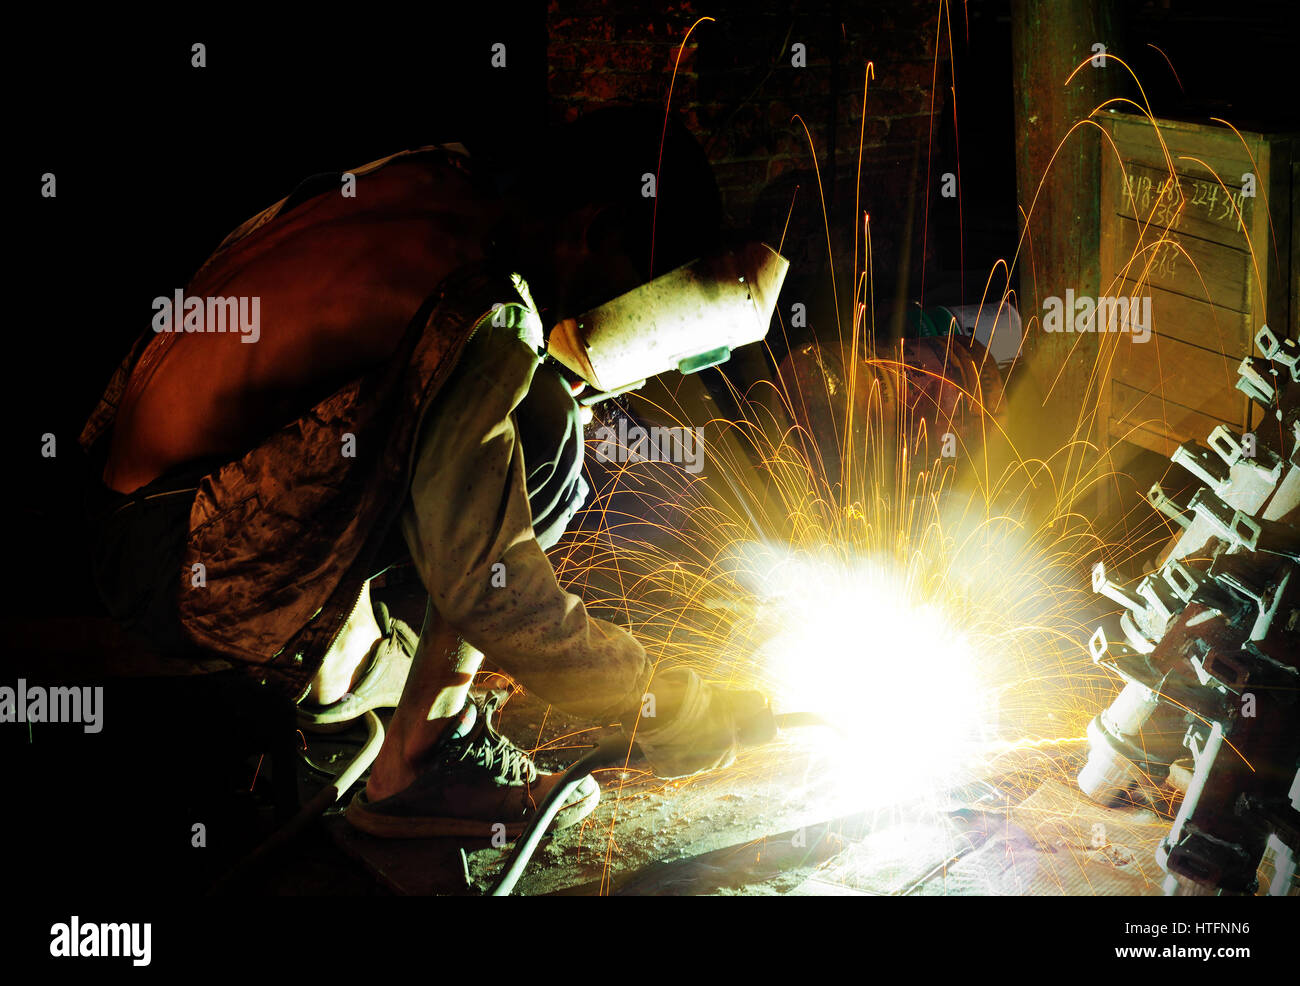 Workers at work, ongoing welding operation. Stock Photo